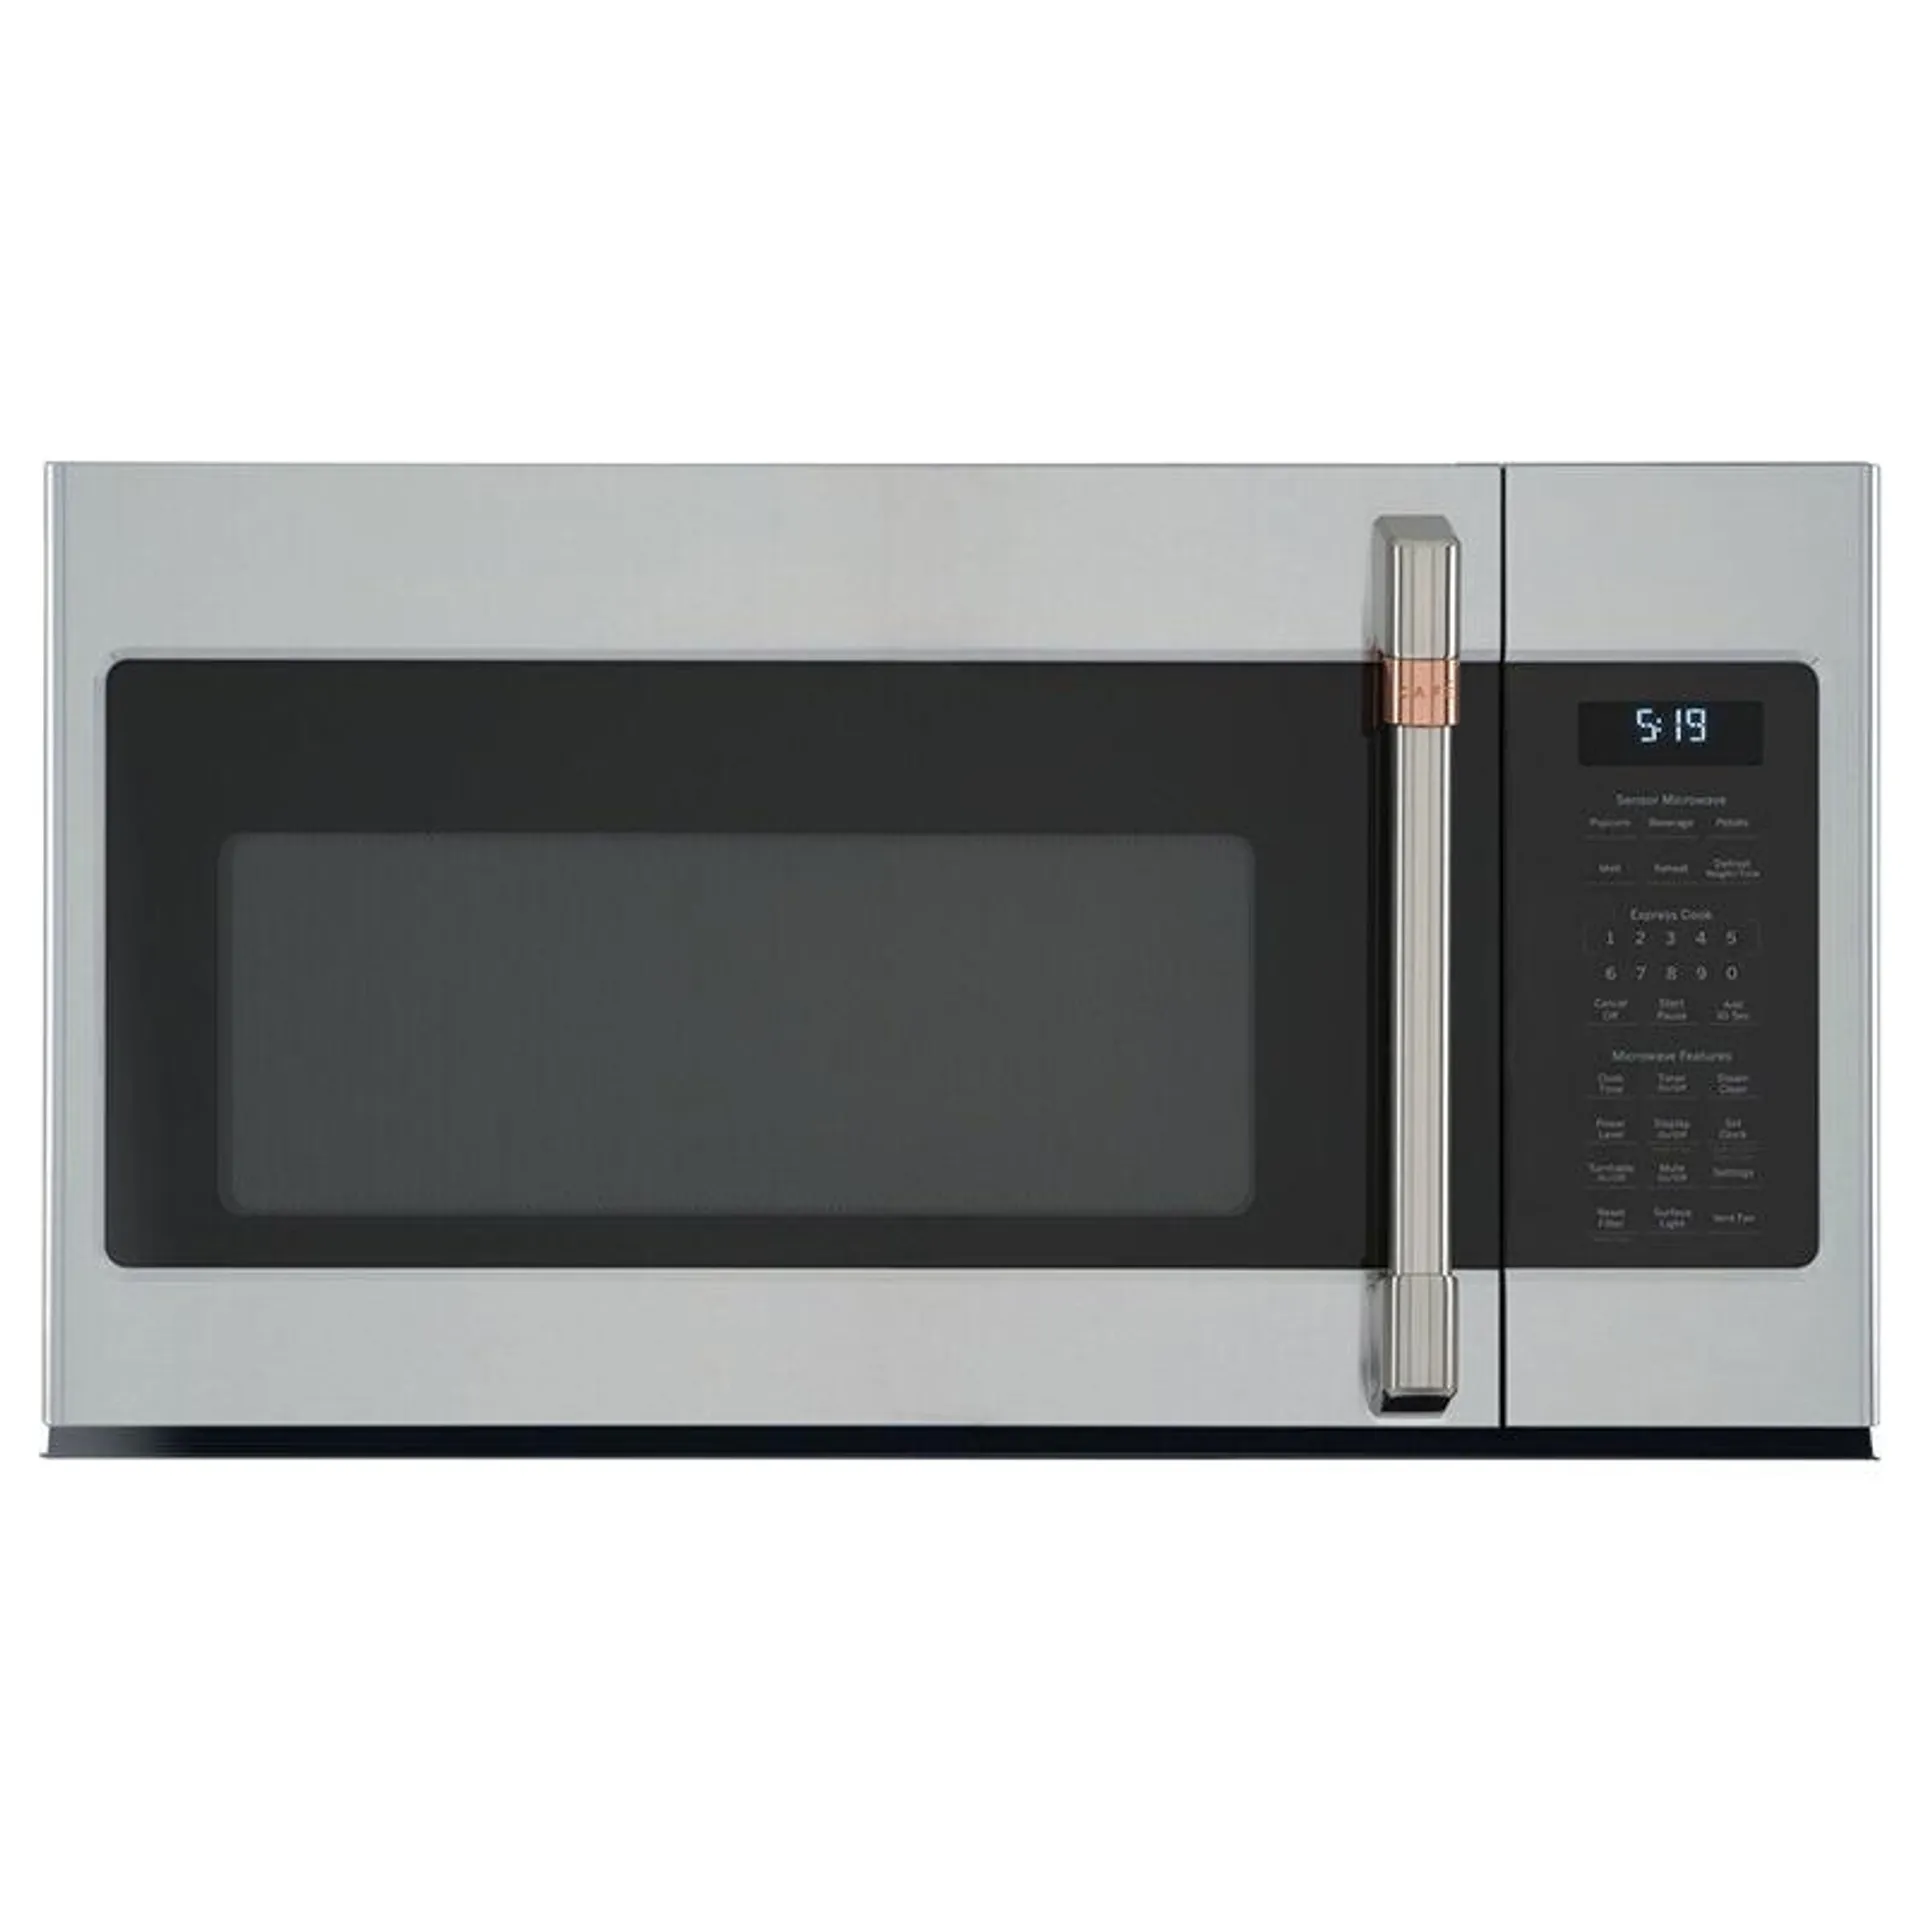 Cafe 30" 1.9 Cu. Ft. Over-the-Range Microwave with 10 Power Levels, 400 CFM & Sensor Cooking Controls - Stainless Steel